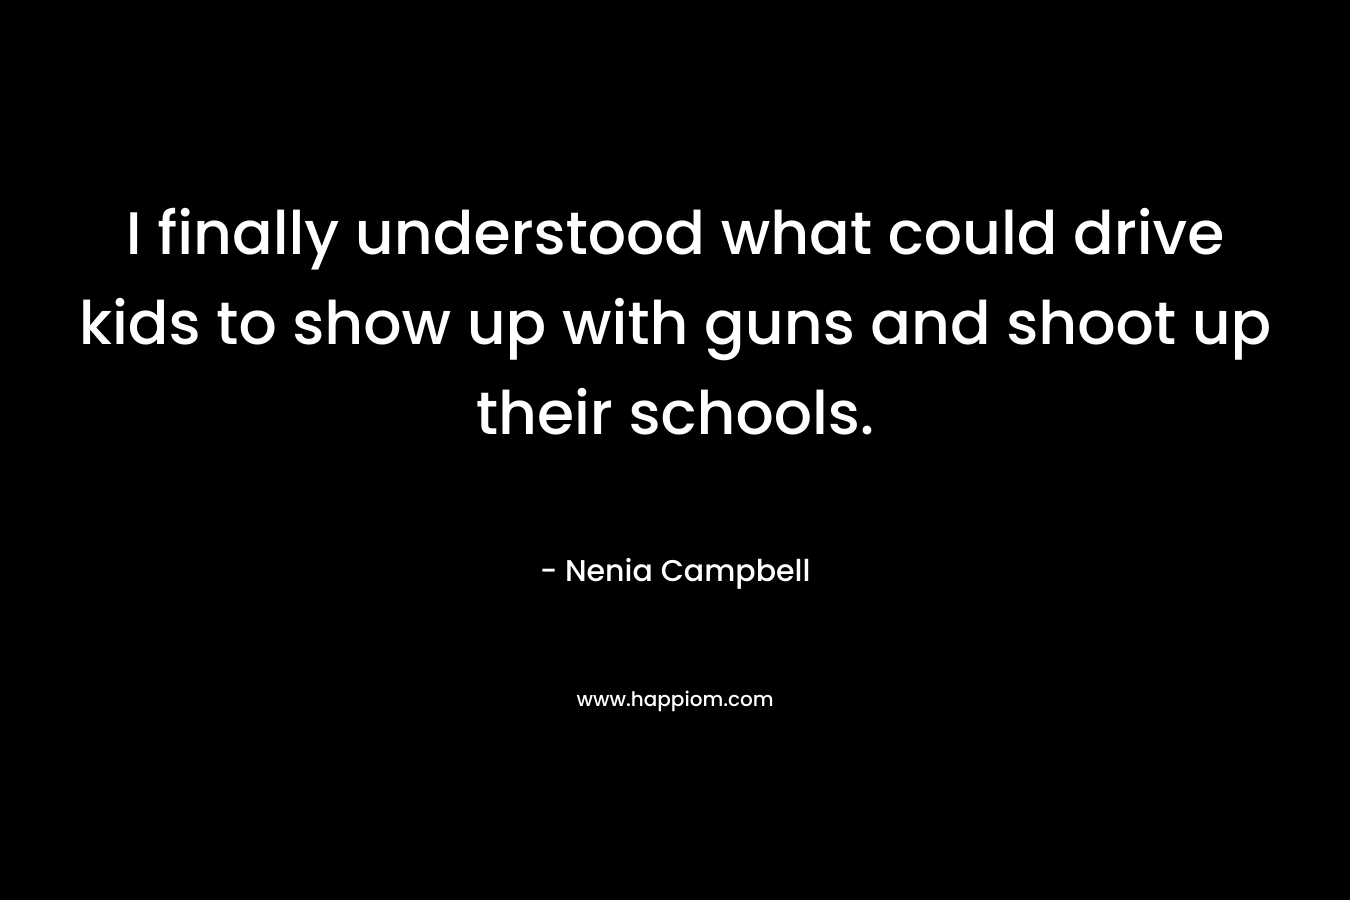 I finally understood what could drive kids to show up with guns and shoot up their schools.